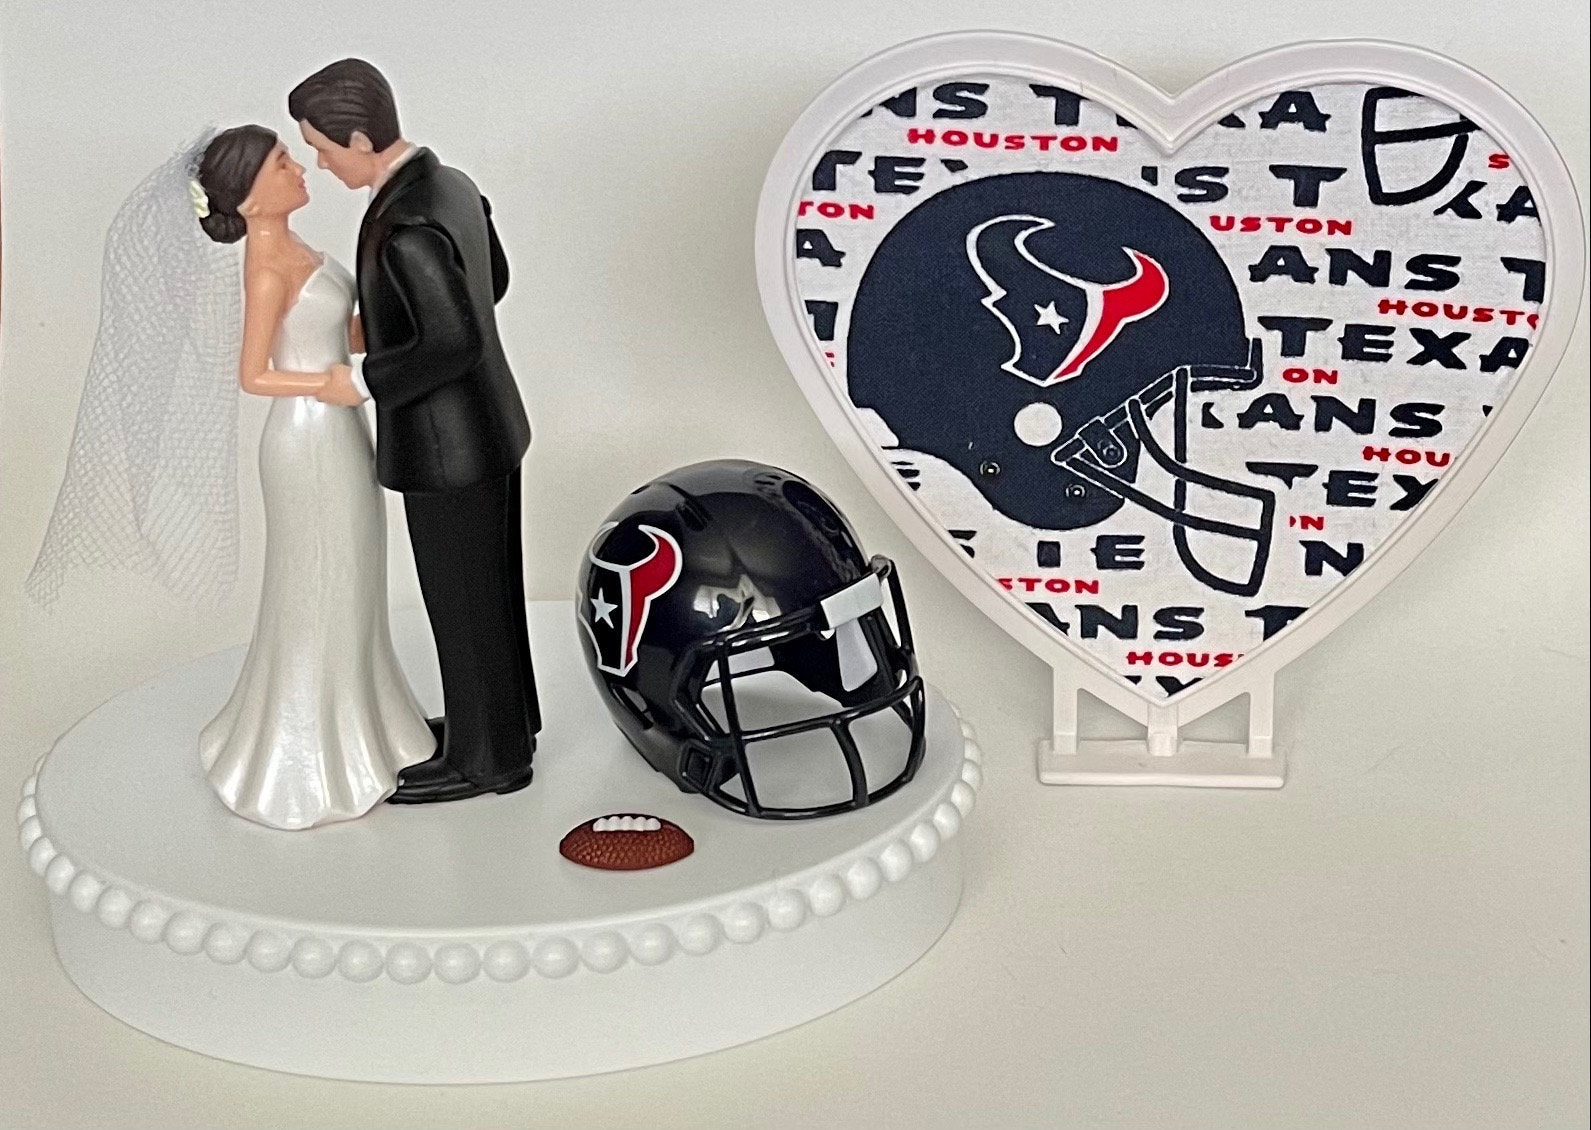 Wedding Cake Topper Houston Texans Football Themed Pretty Short-Haired Bride Groom Sports Fans Unique Reception Bridal Shower Gift Idea